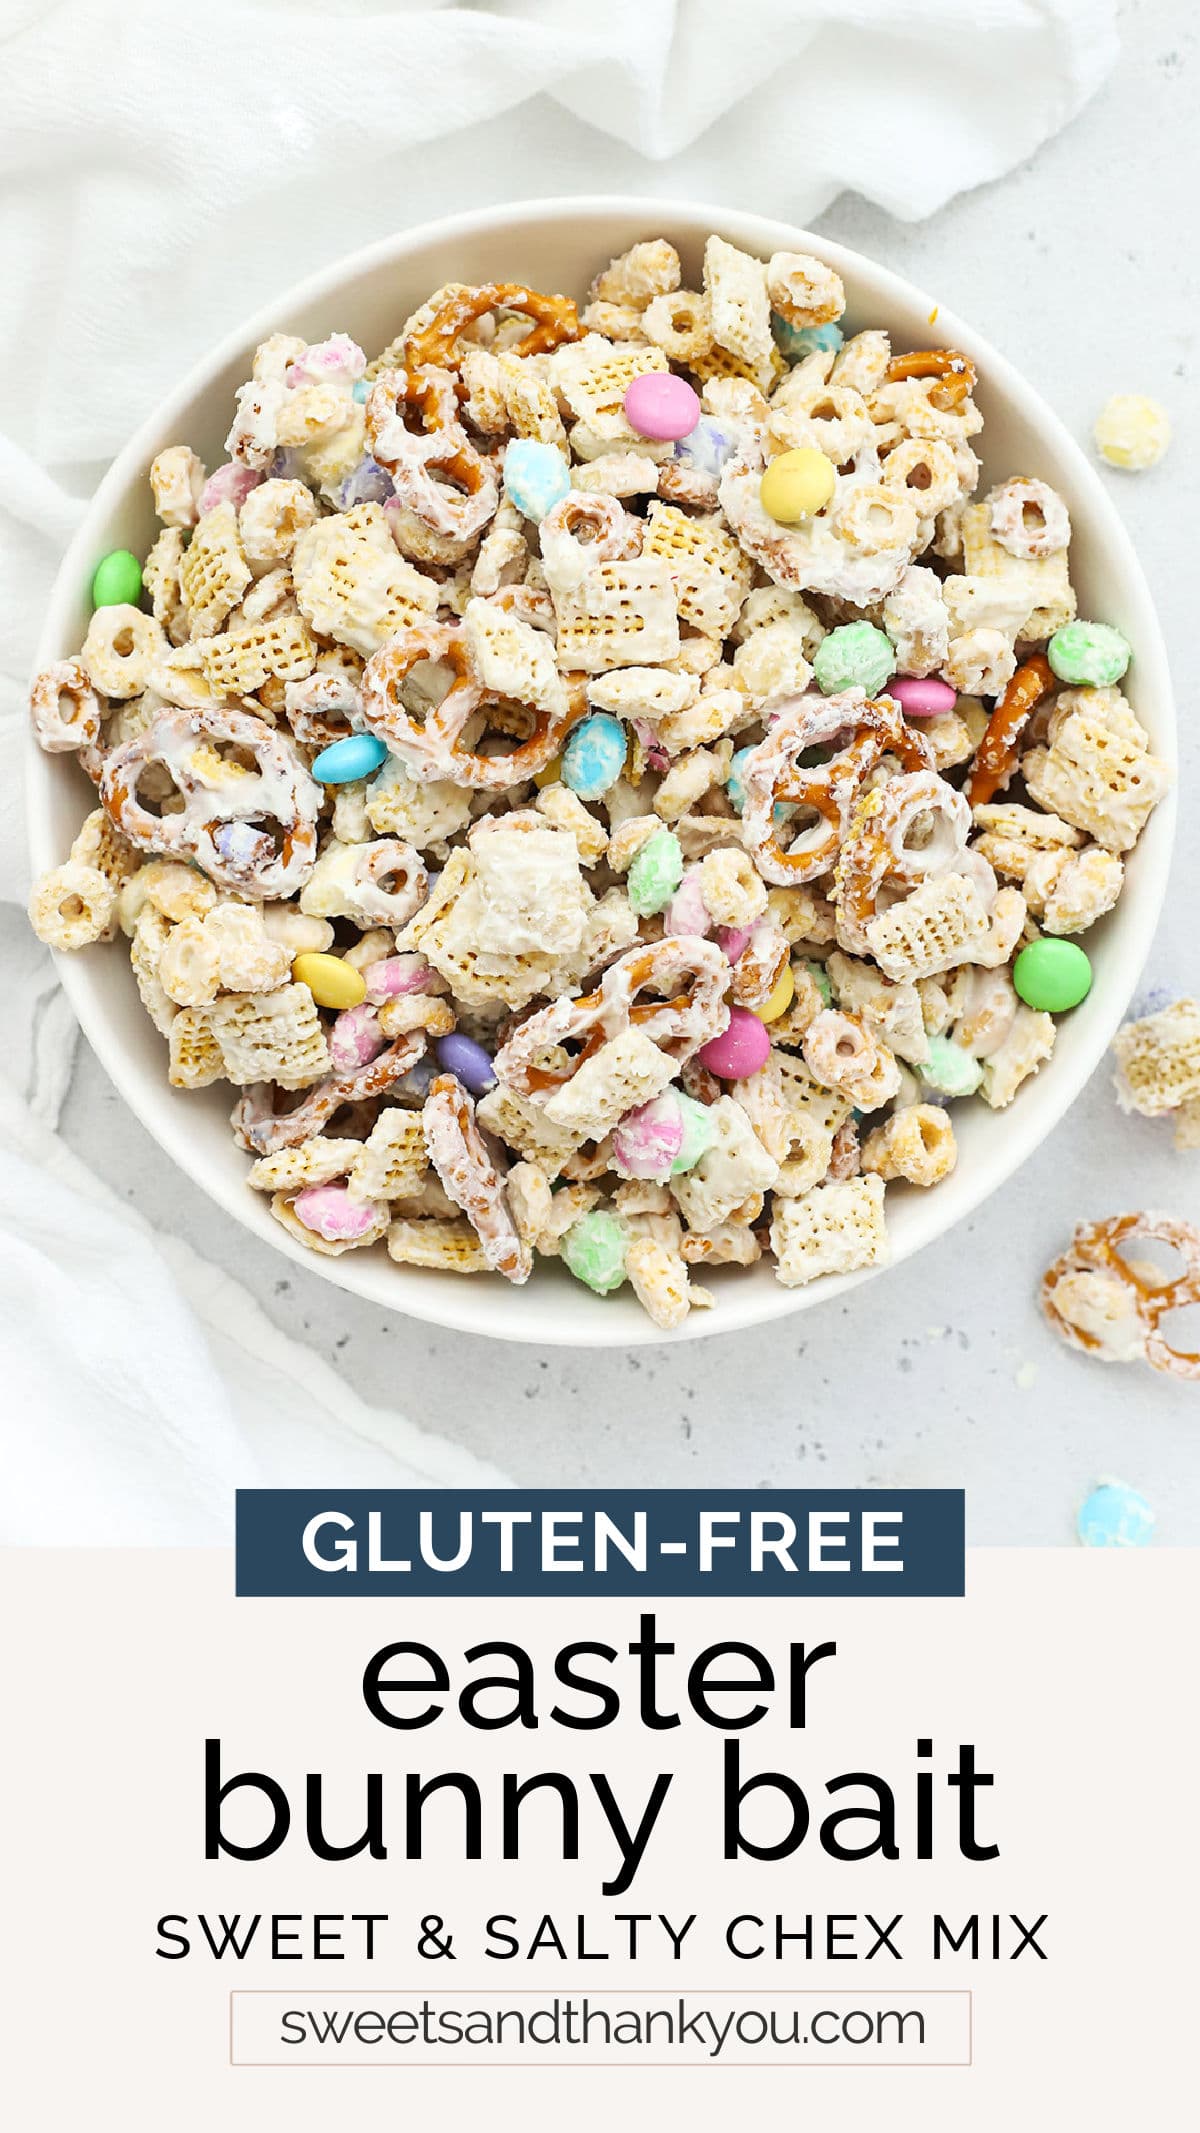 Let's make bunny bait! This sweet Easter Chex Mix is quick, easy, and majorly addictive. A delightful Easter dessert recipe! (Gluten-Free) // Sweet Easter Chex Mix // Sweet Easter Snack Mix // No-Bake Easter Dessert // Easter Bunny Bait // Easter Bunny Snack Mix // Kids Easter Snack // Easy Easter Treat // Gluten-Free Easter Dessert // Gluten-Free Easter Snack Mix // Gluten-Free Easter Treat // sweet Chex Mix recipe // Chex Mix with m&ms